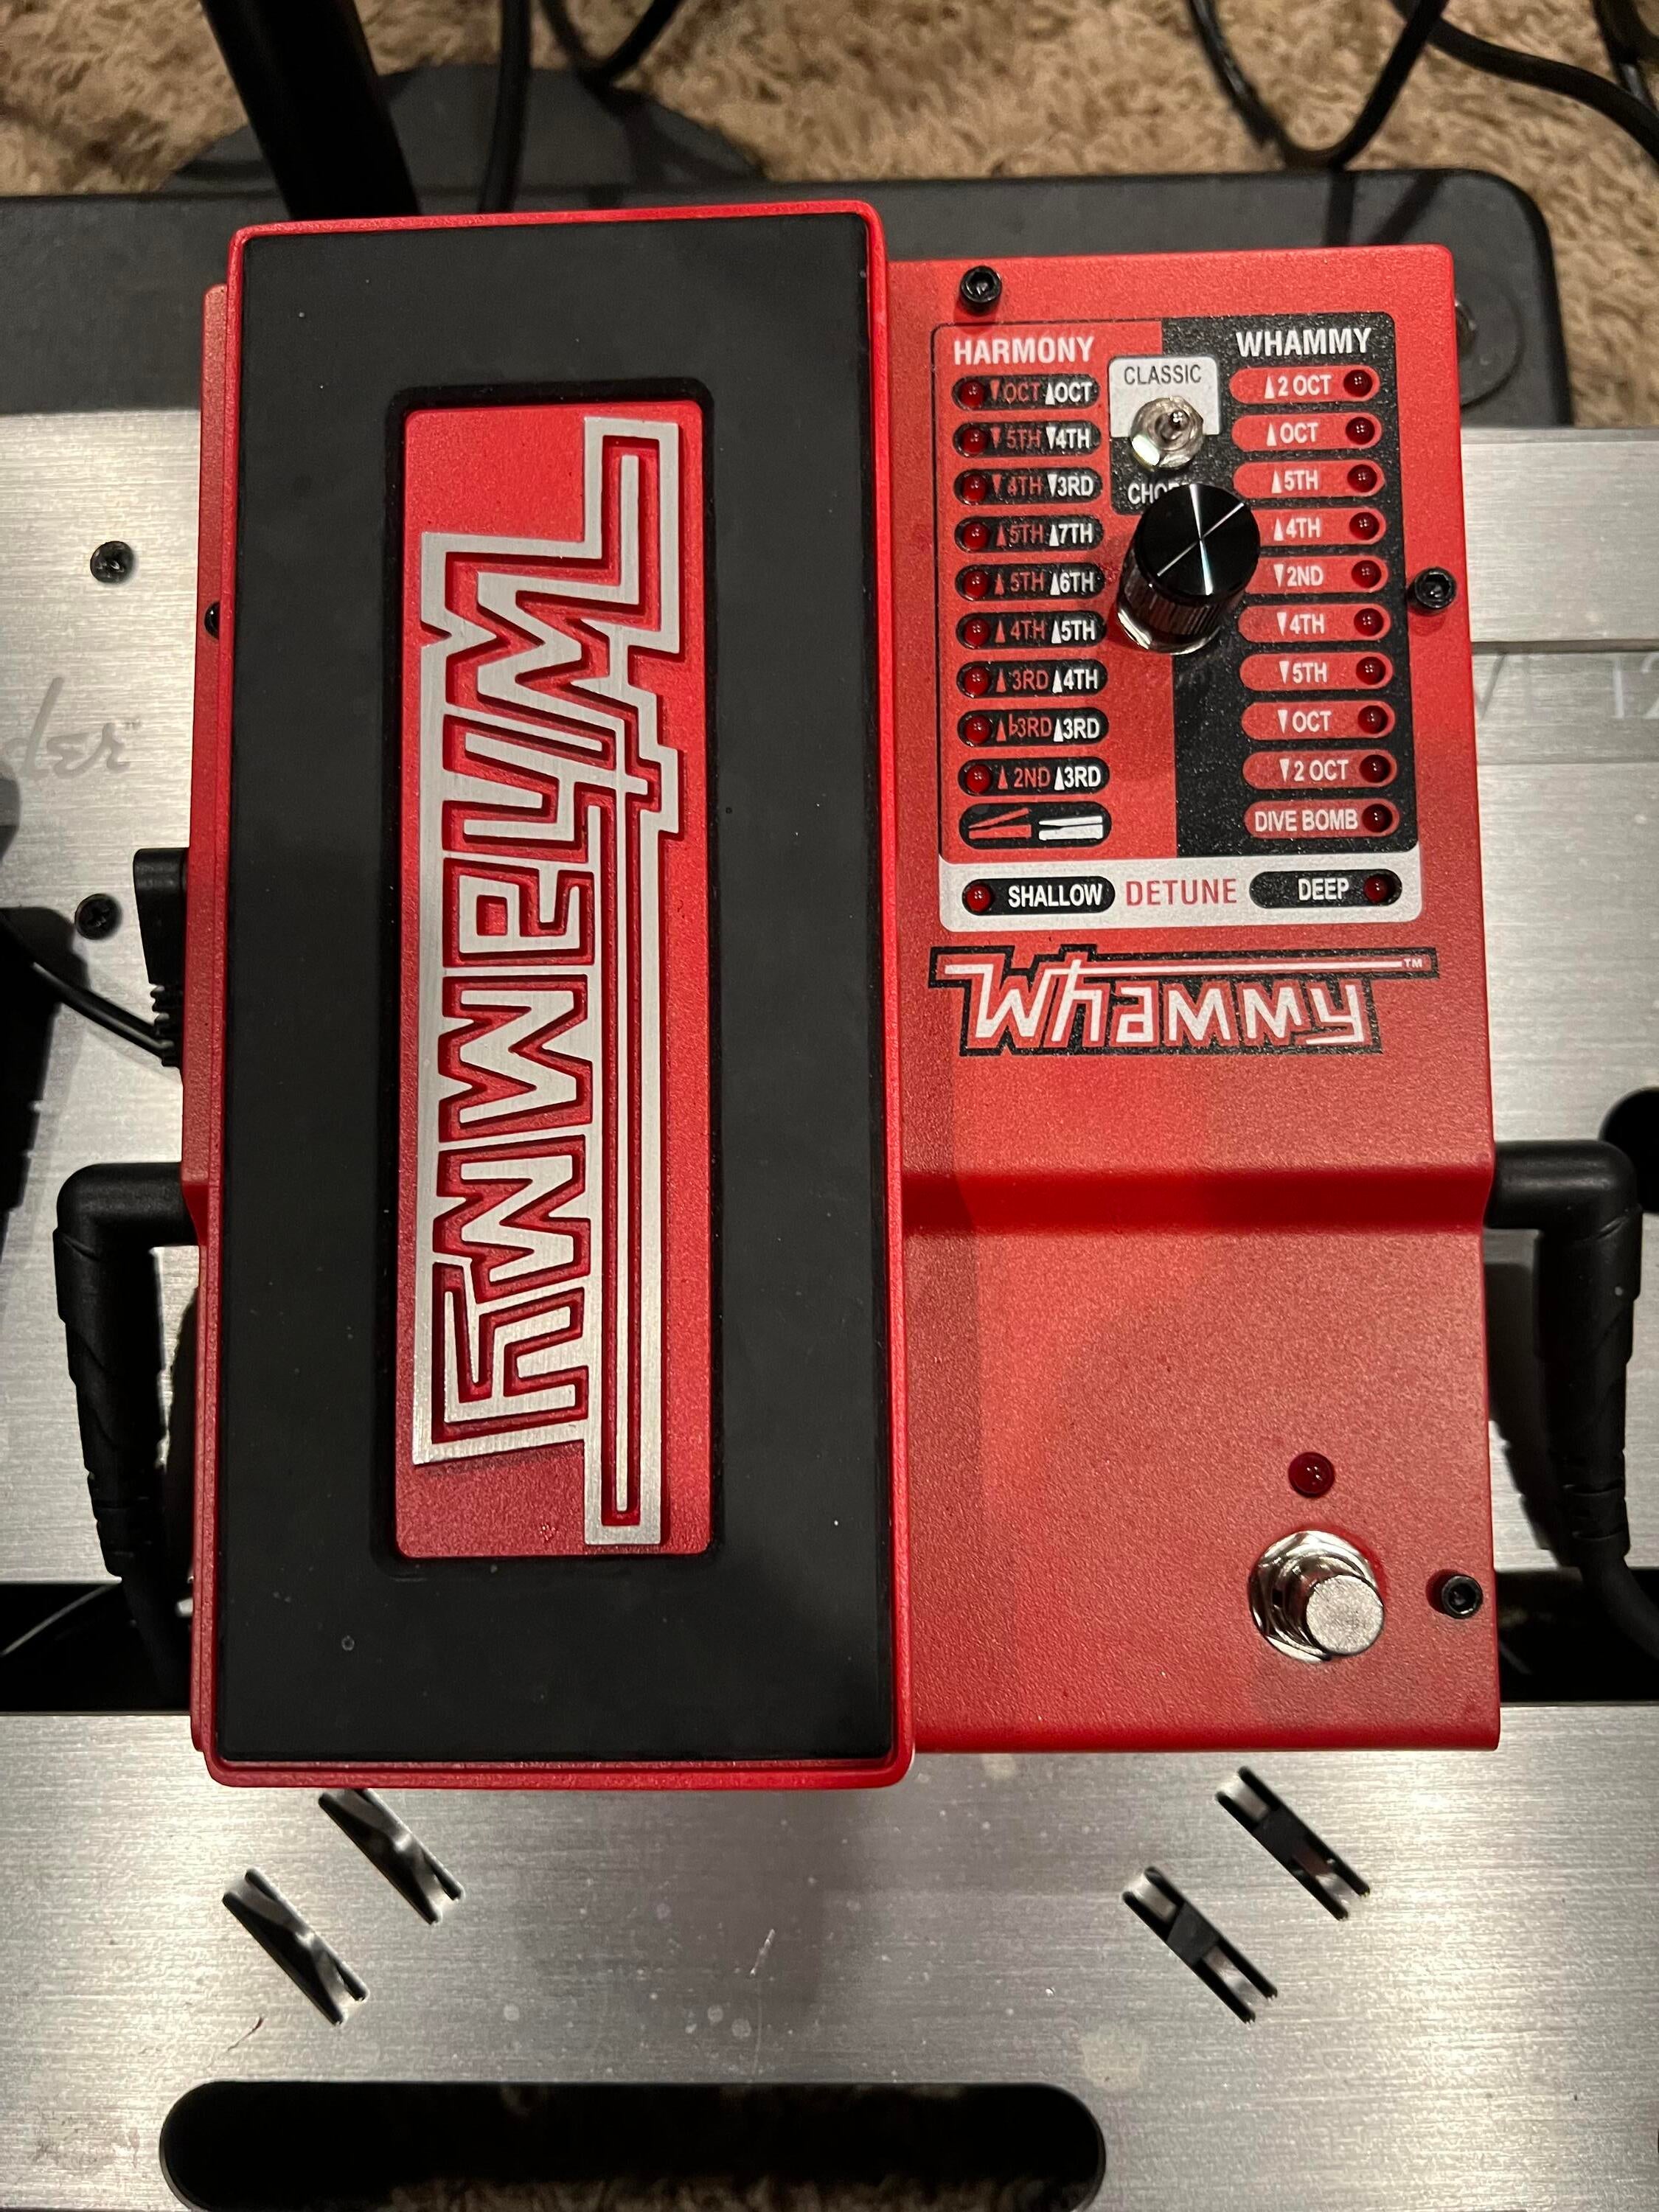 Used Digitech Whammy 5 Pitch Shift Pedal